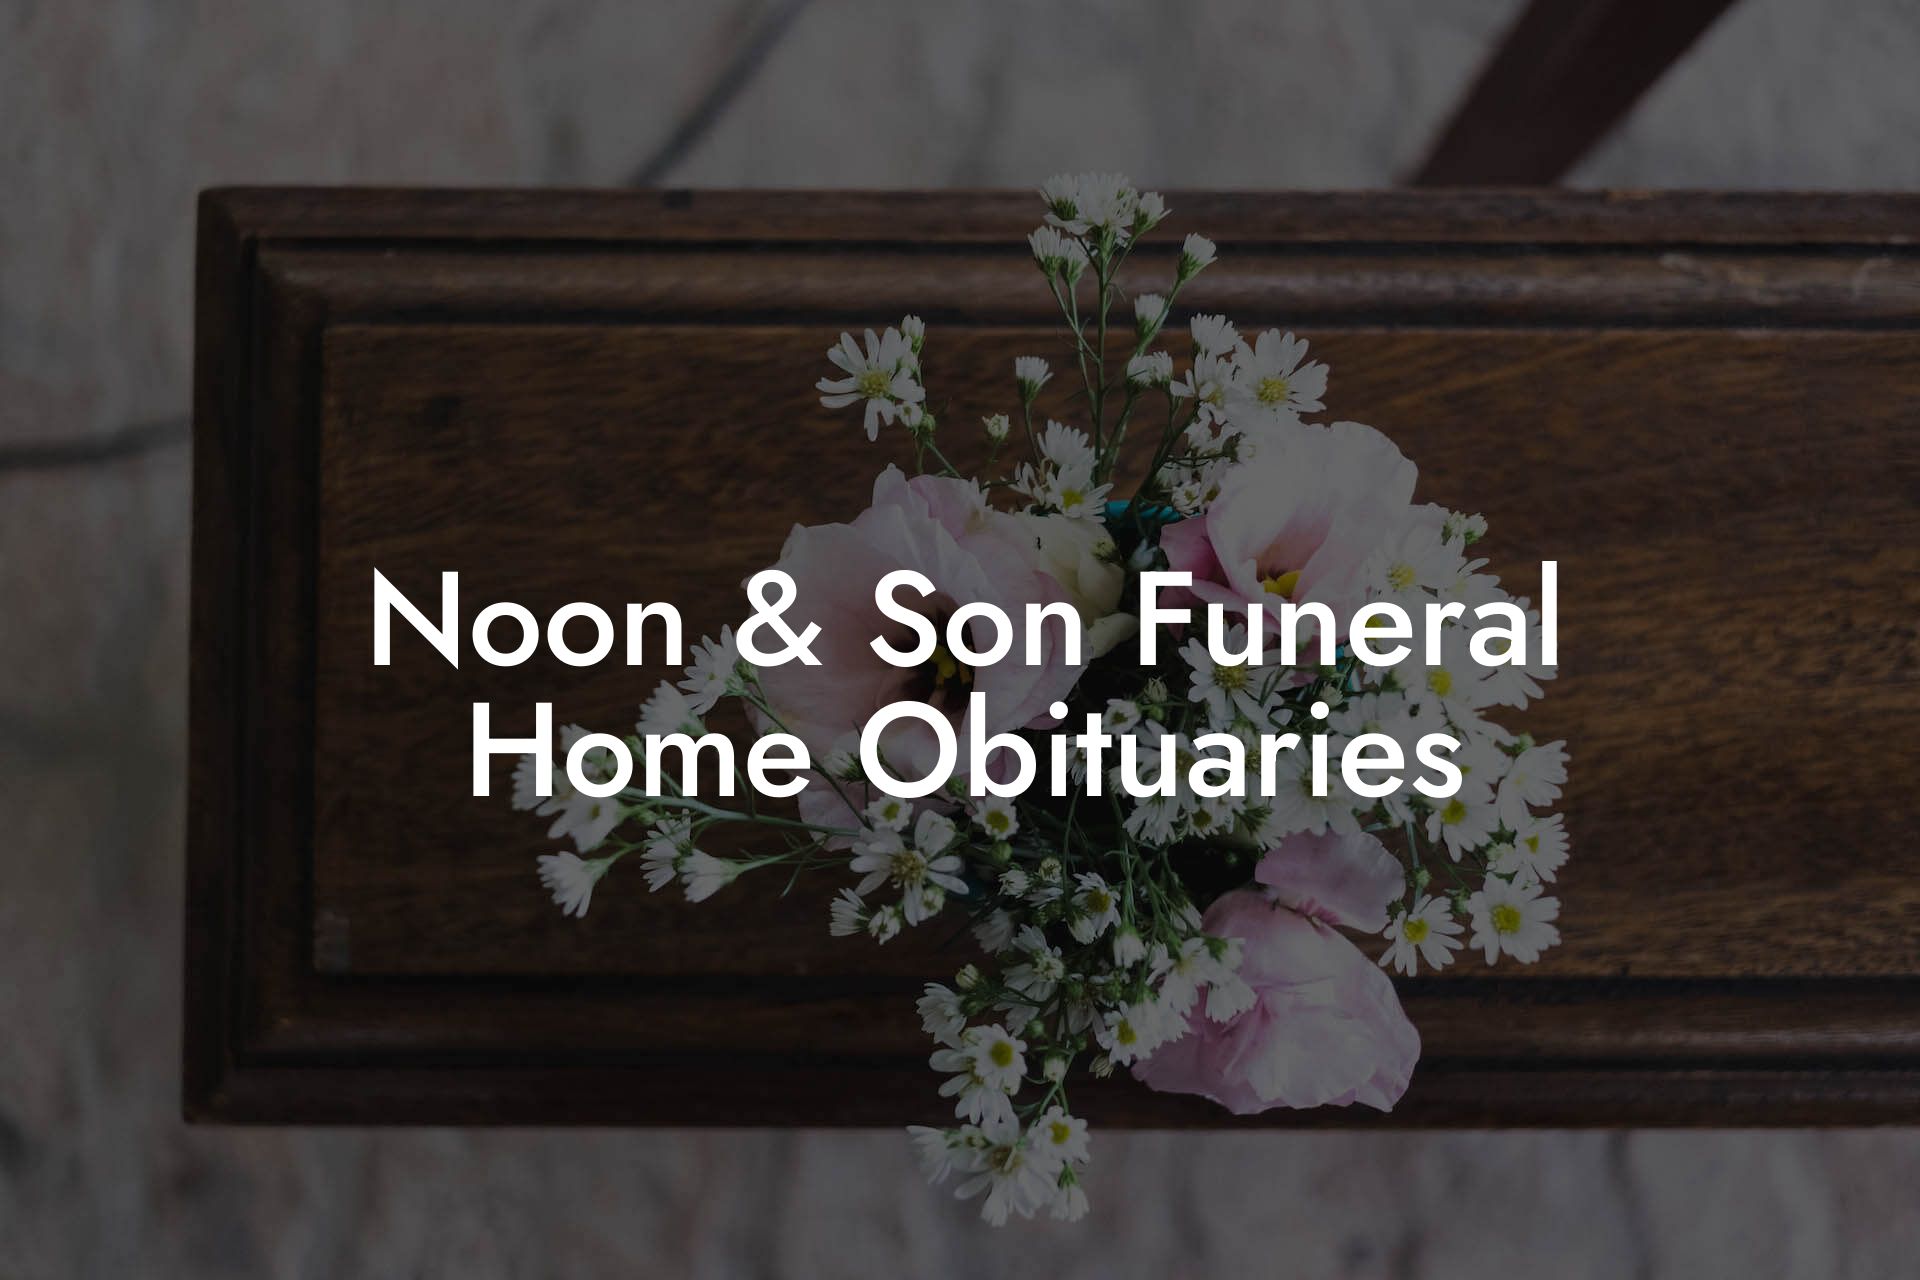 Noon & Son Funeral Home Obituaries